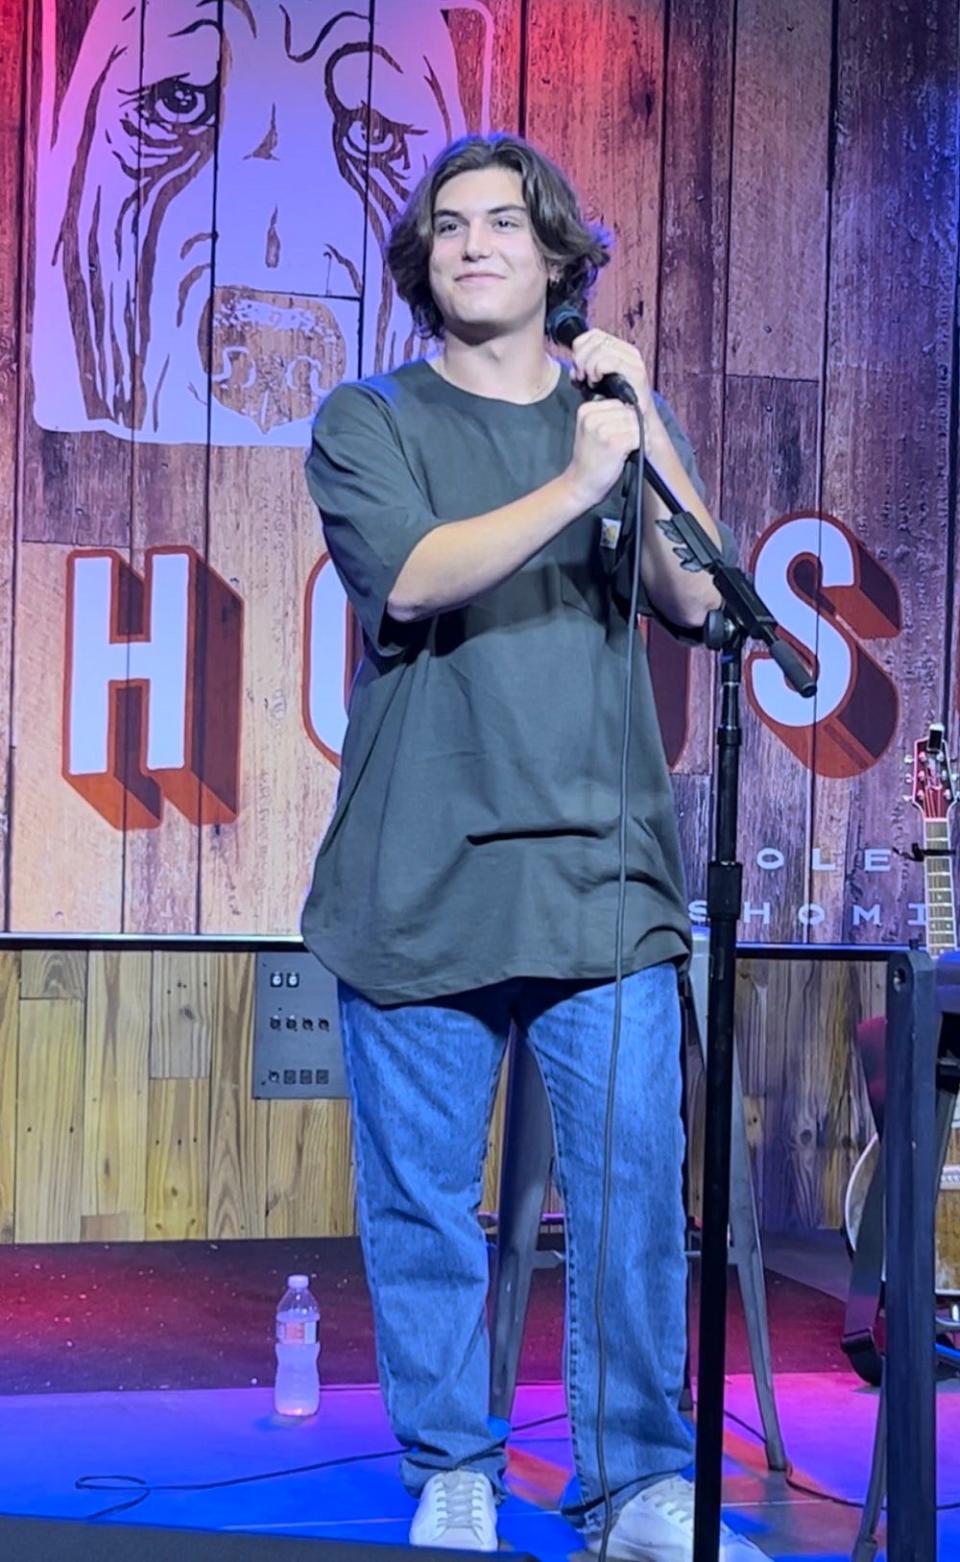 Kingston Rossdale, the 17-year-old son of Gwen Stefani and Gavin Rossdale, gave his first favorite public performance Aug. 11 at his stepfather Blake Shelton's Ole Red Tishomingo restaurant, bar and live music venue.